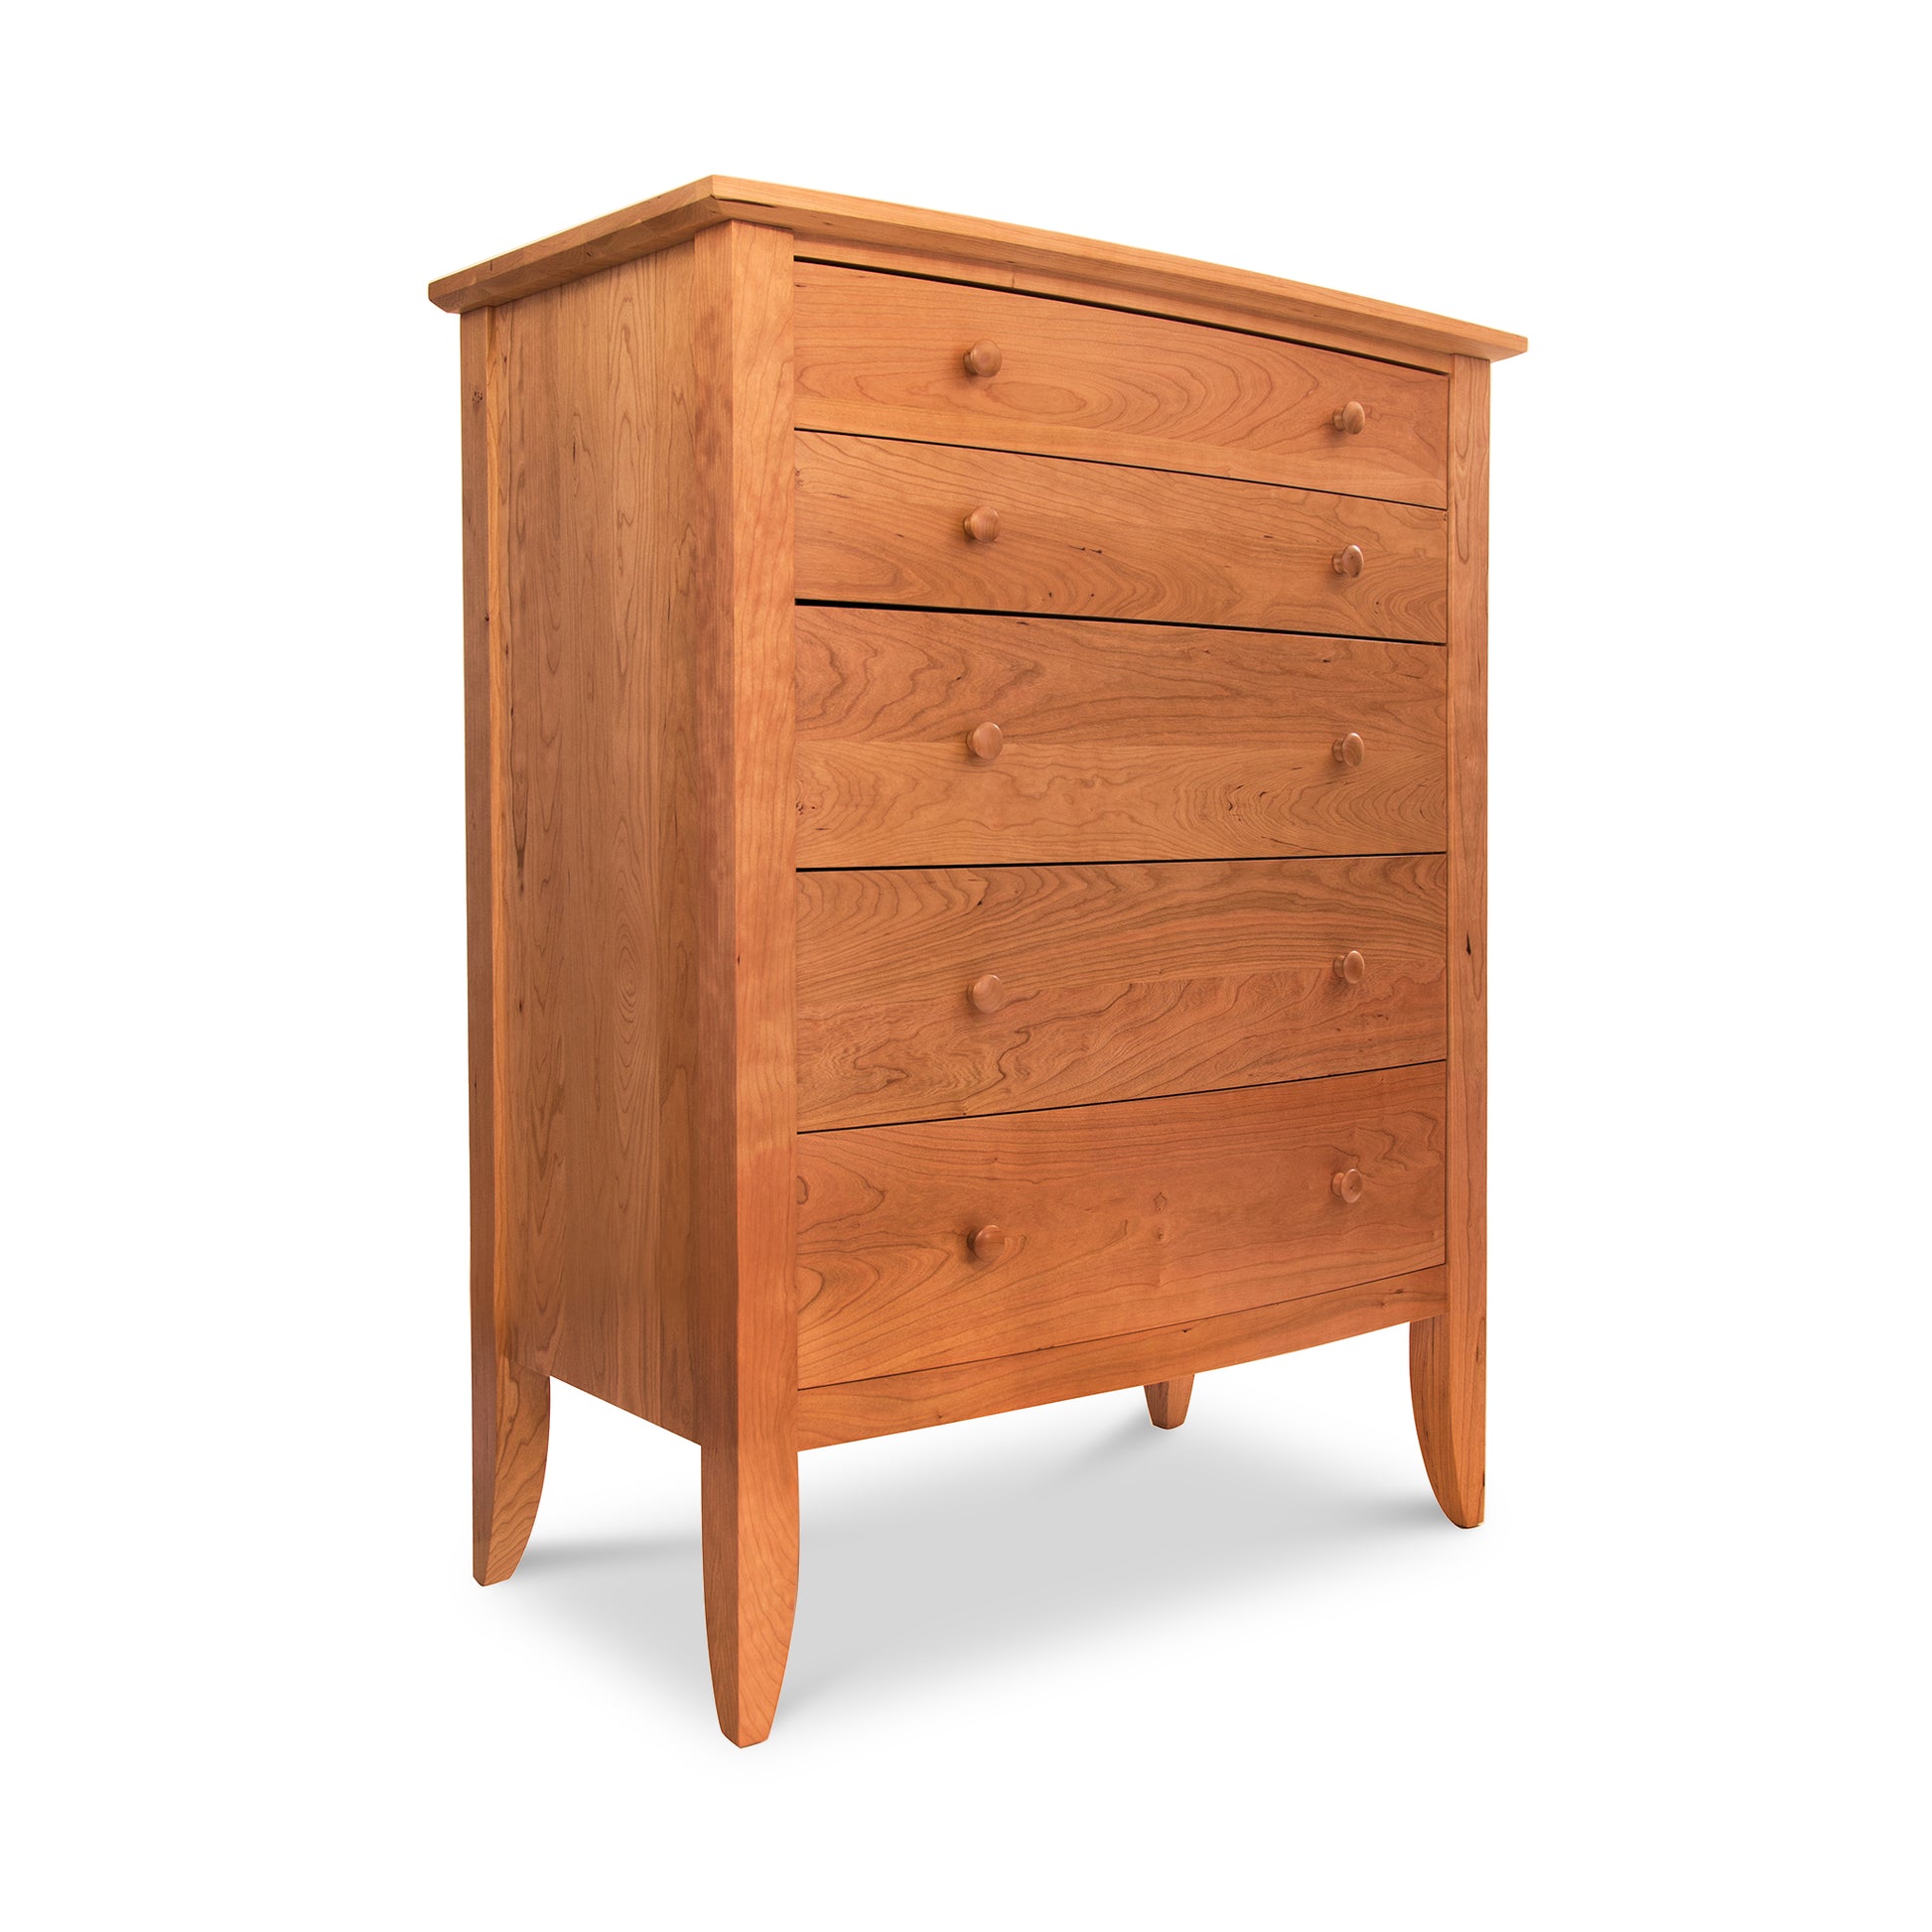 A handmade, Lyndon Furniture Bow Front 5-Drawer Chest made from hardwoods on a white background.